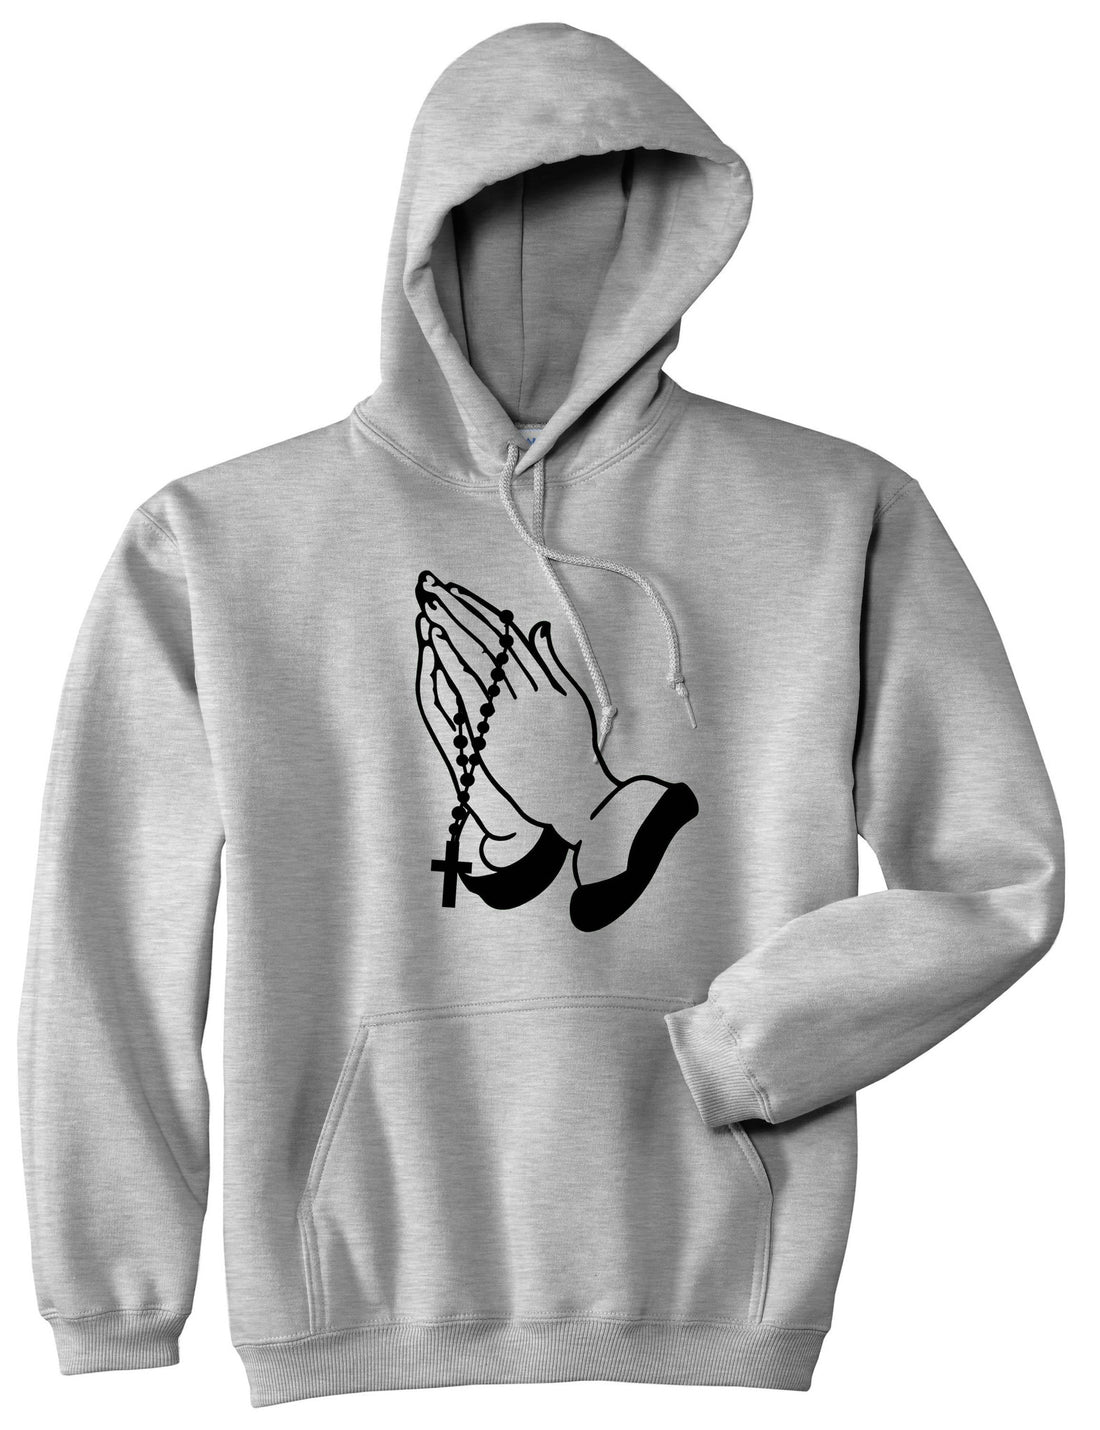 Pray For Them Prayer Hands Rosary Pullover Hoodie Hoody in Grey